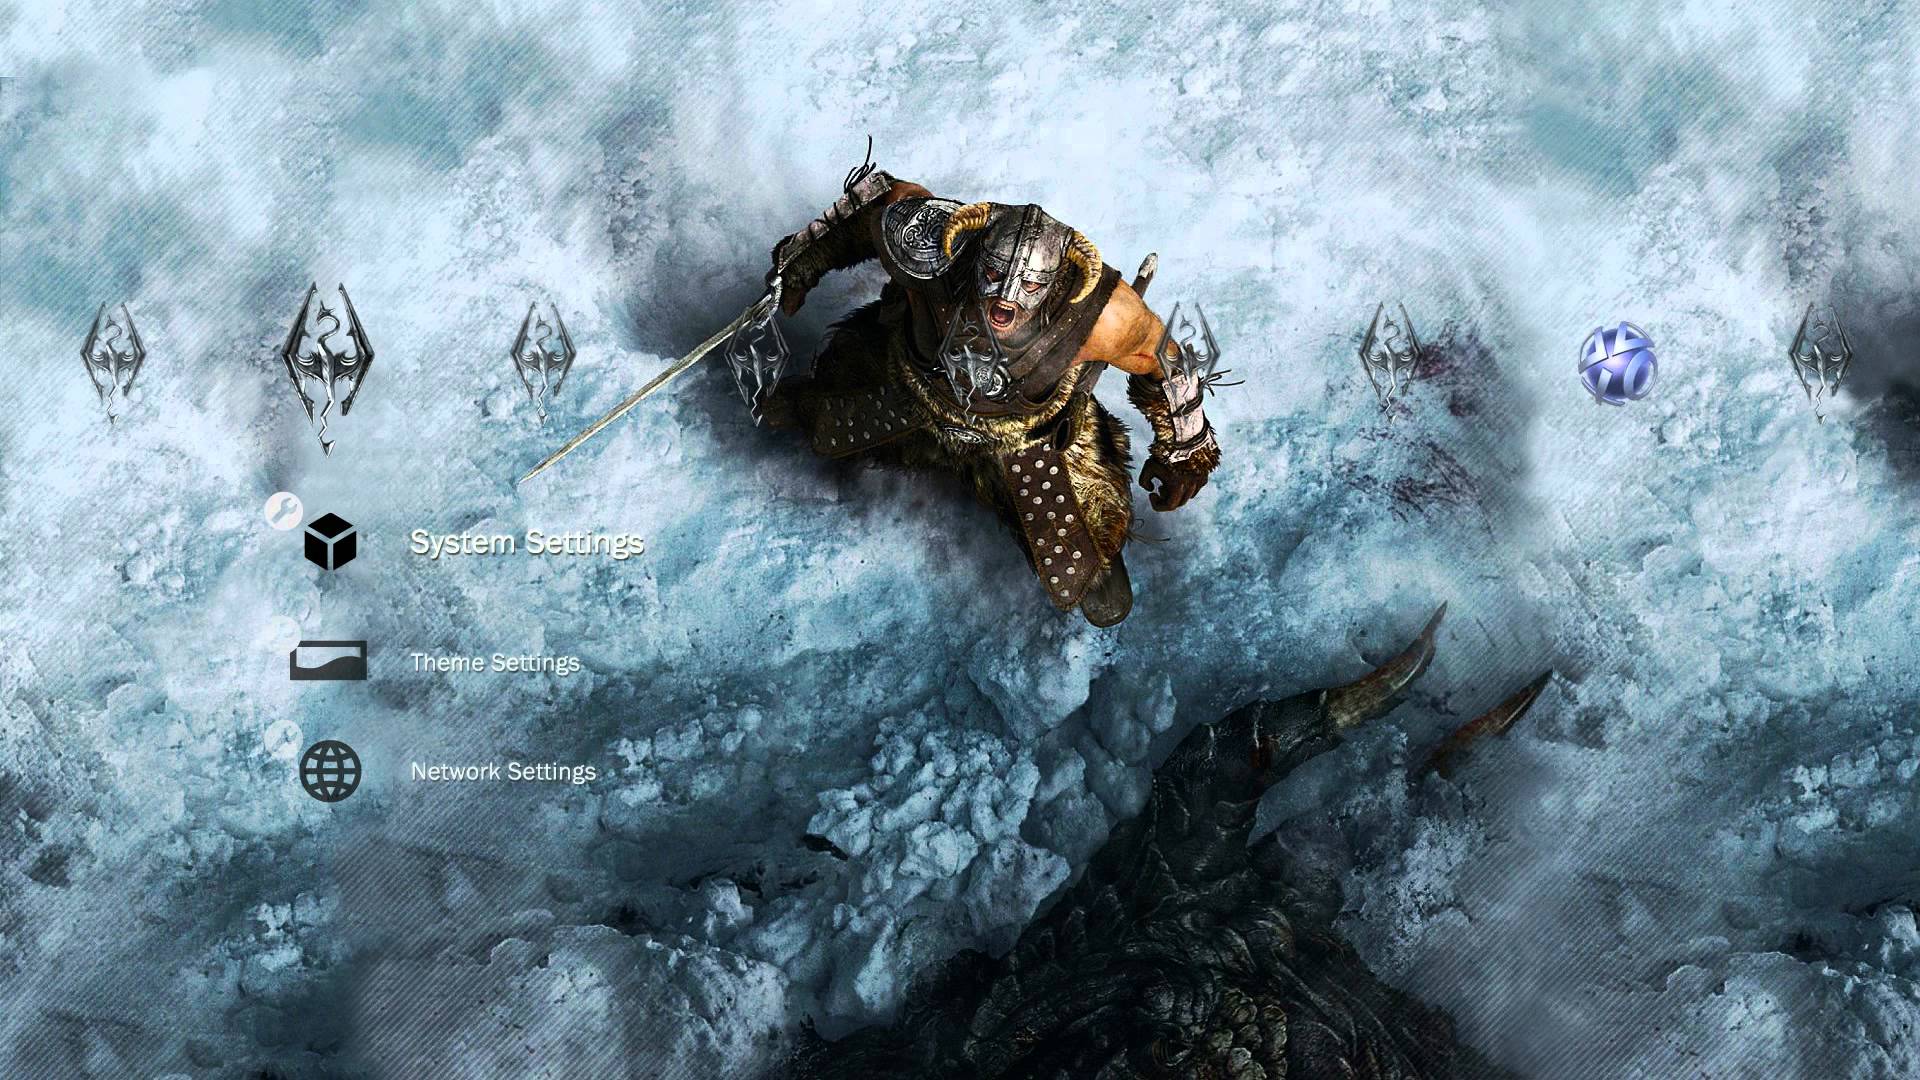 Tes V Skyrim HD Wallpaper Ps3 Theme Links Included